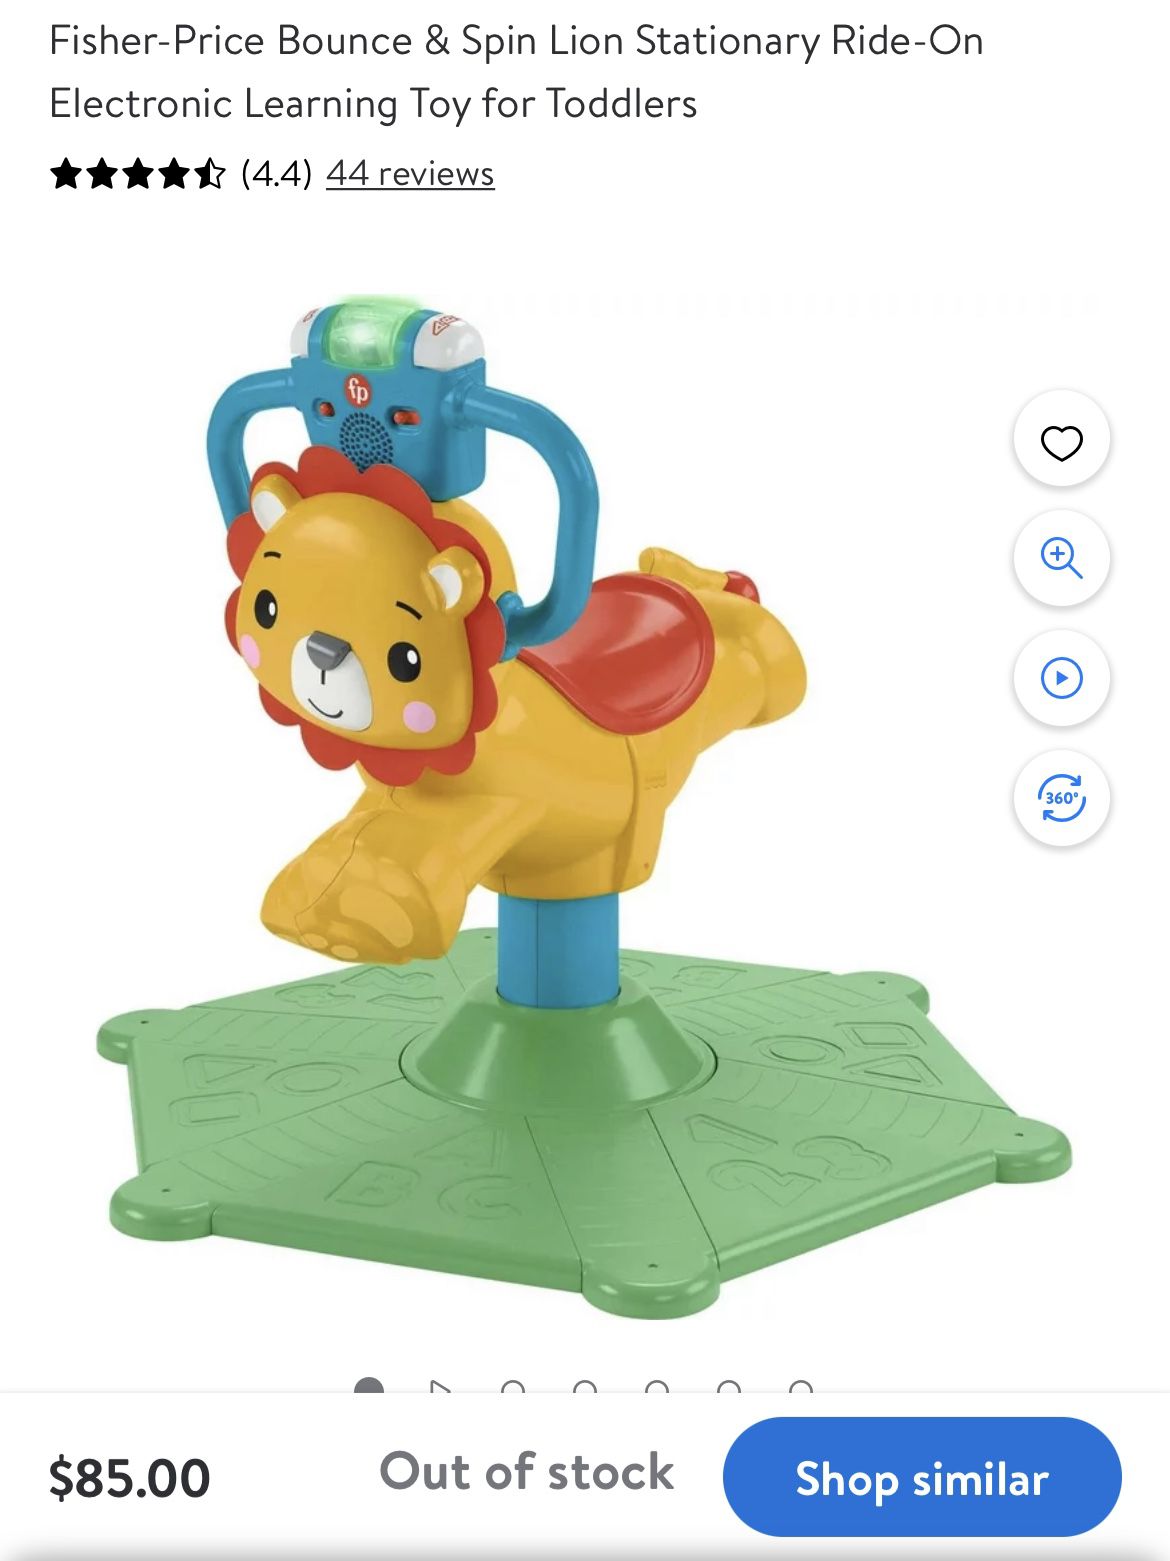 Back to Fisher-Price Bounce & Spin Lion Stationary Ride-On Electronic Learning Toy for Toddlers